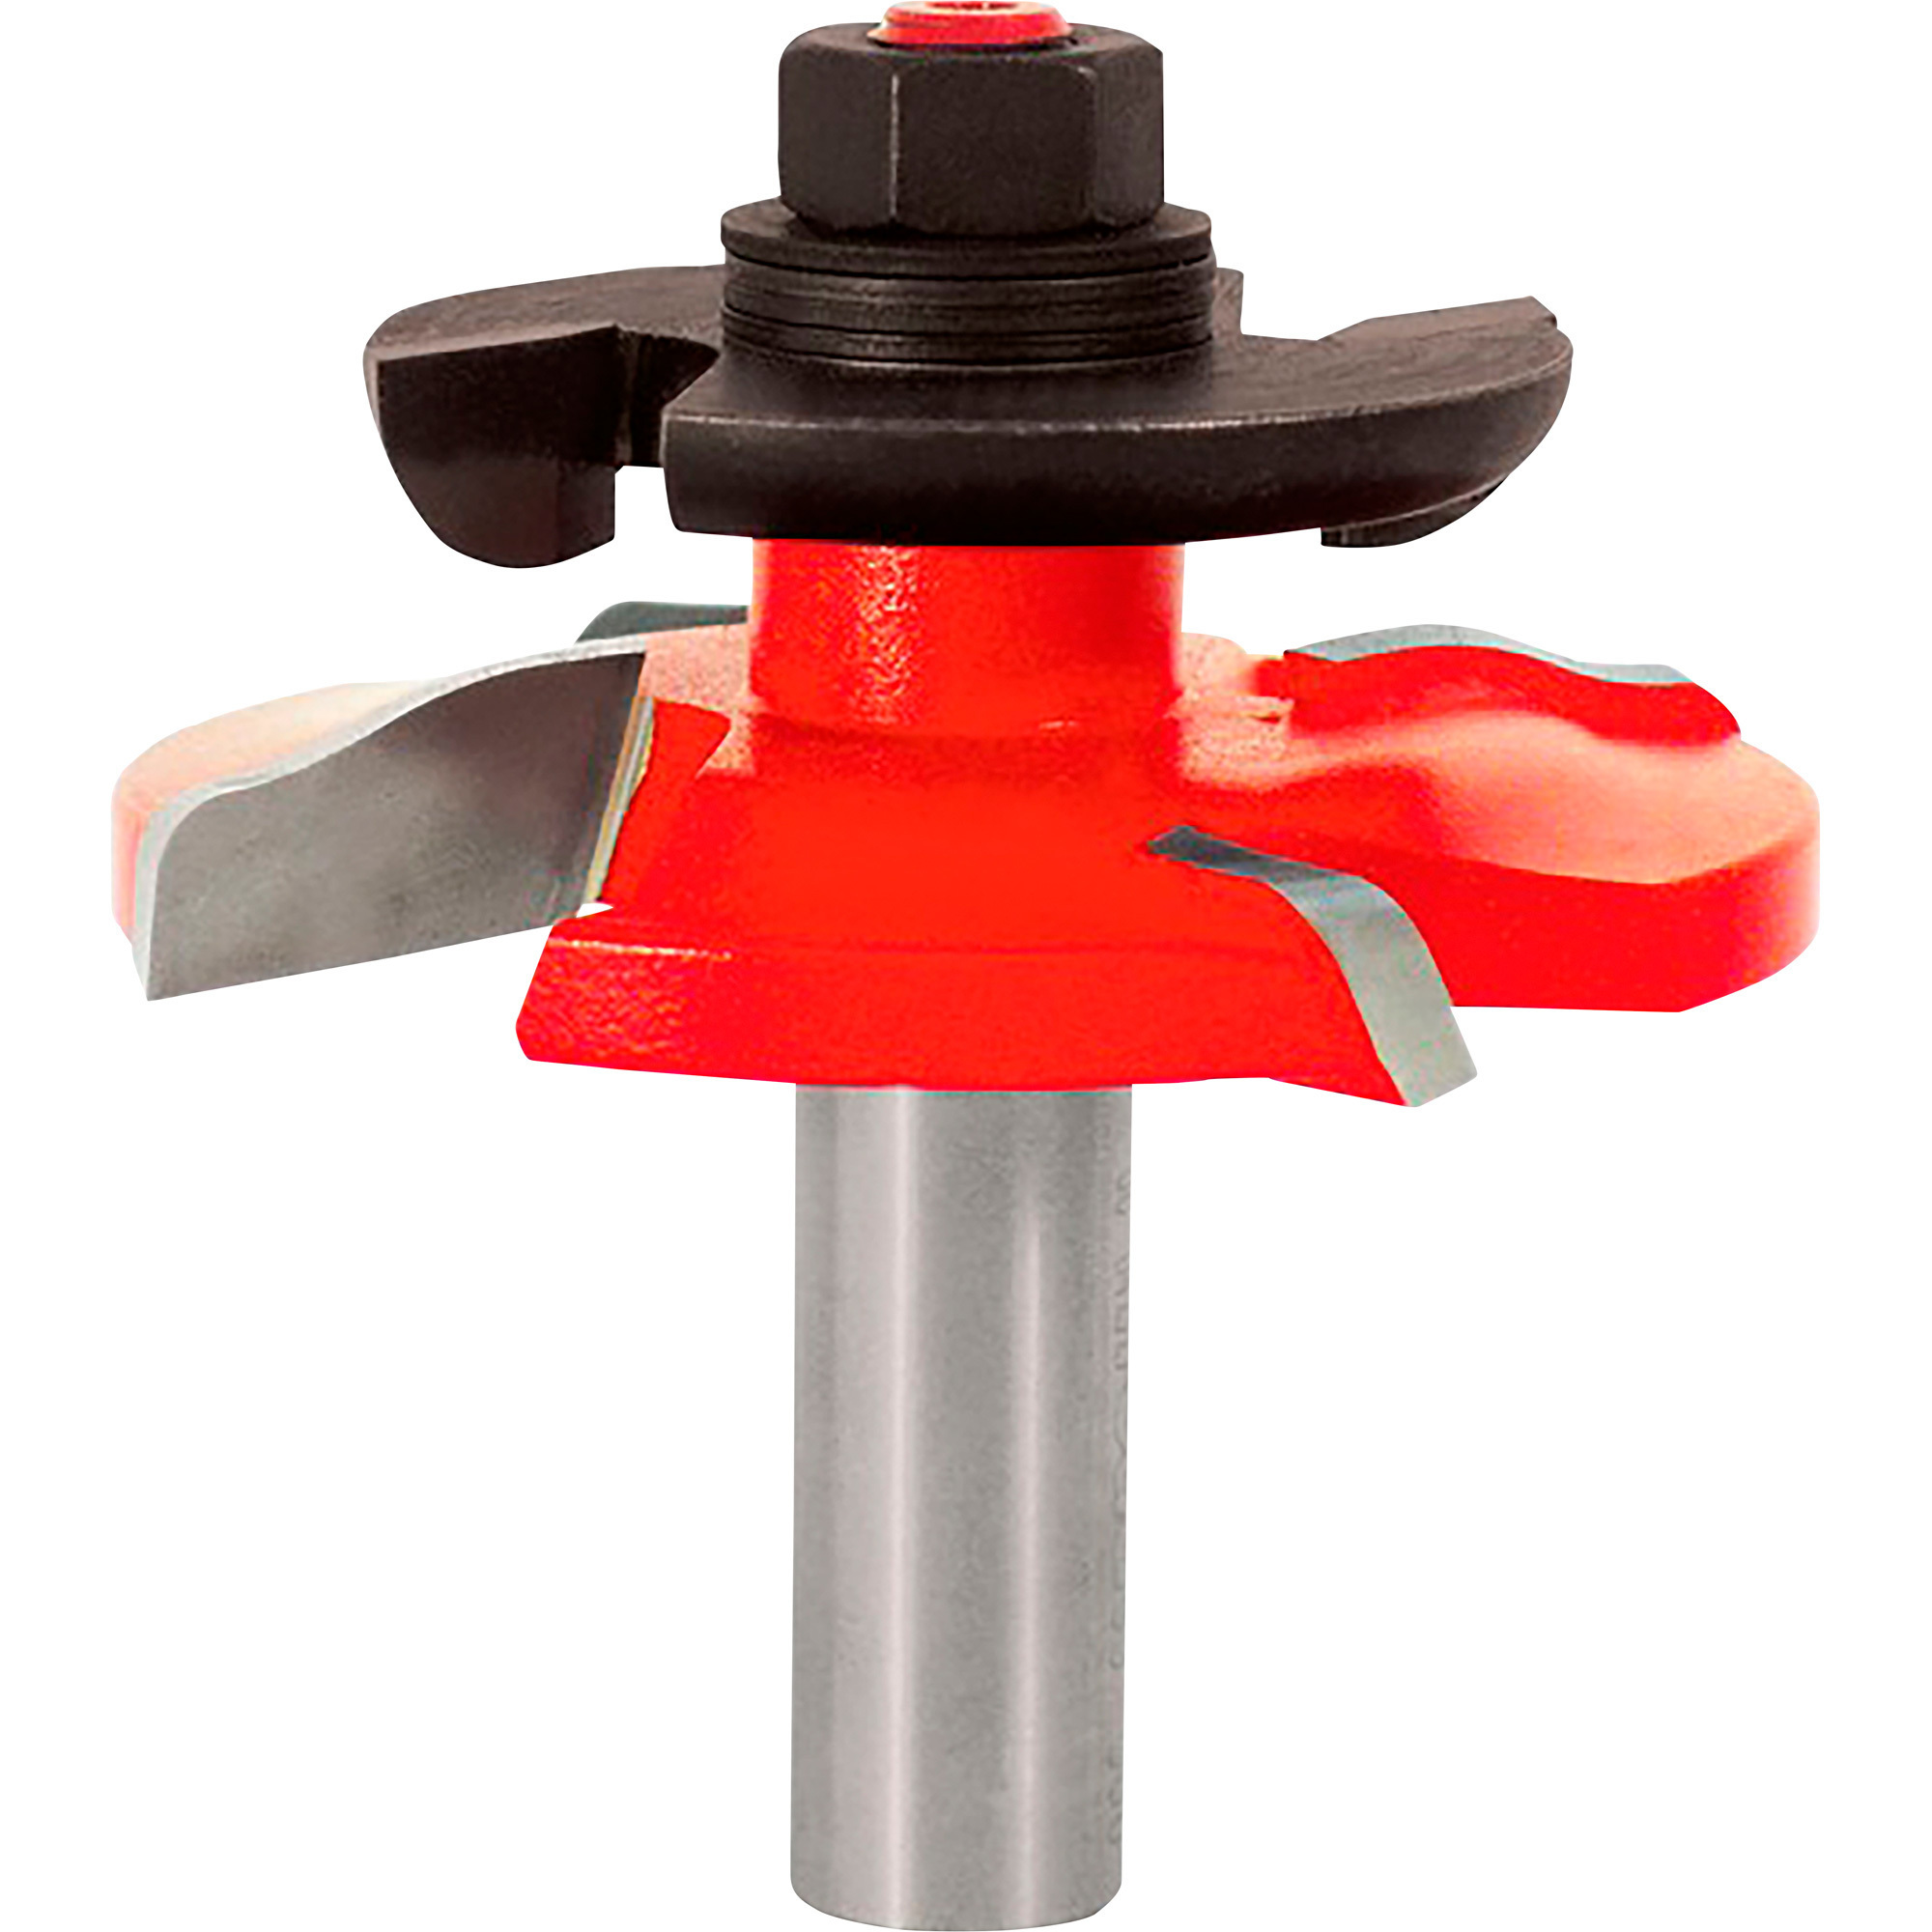 Freud Raised Panel Router Bit with Back Cutter 3/4Inch Cutting Width, Model 99-500